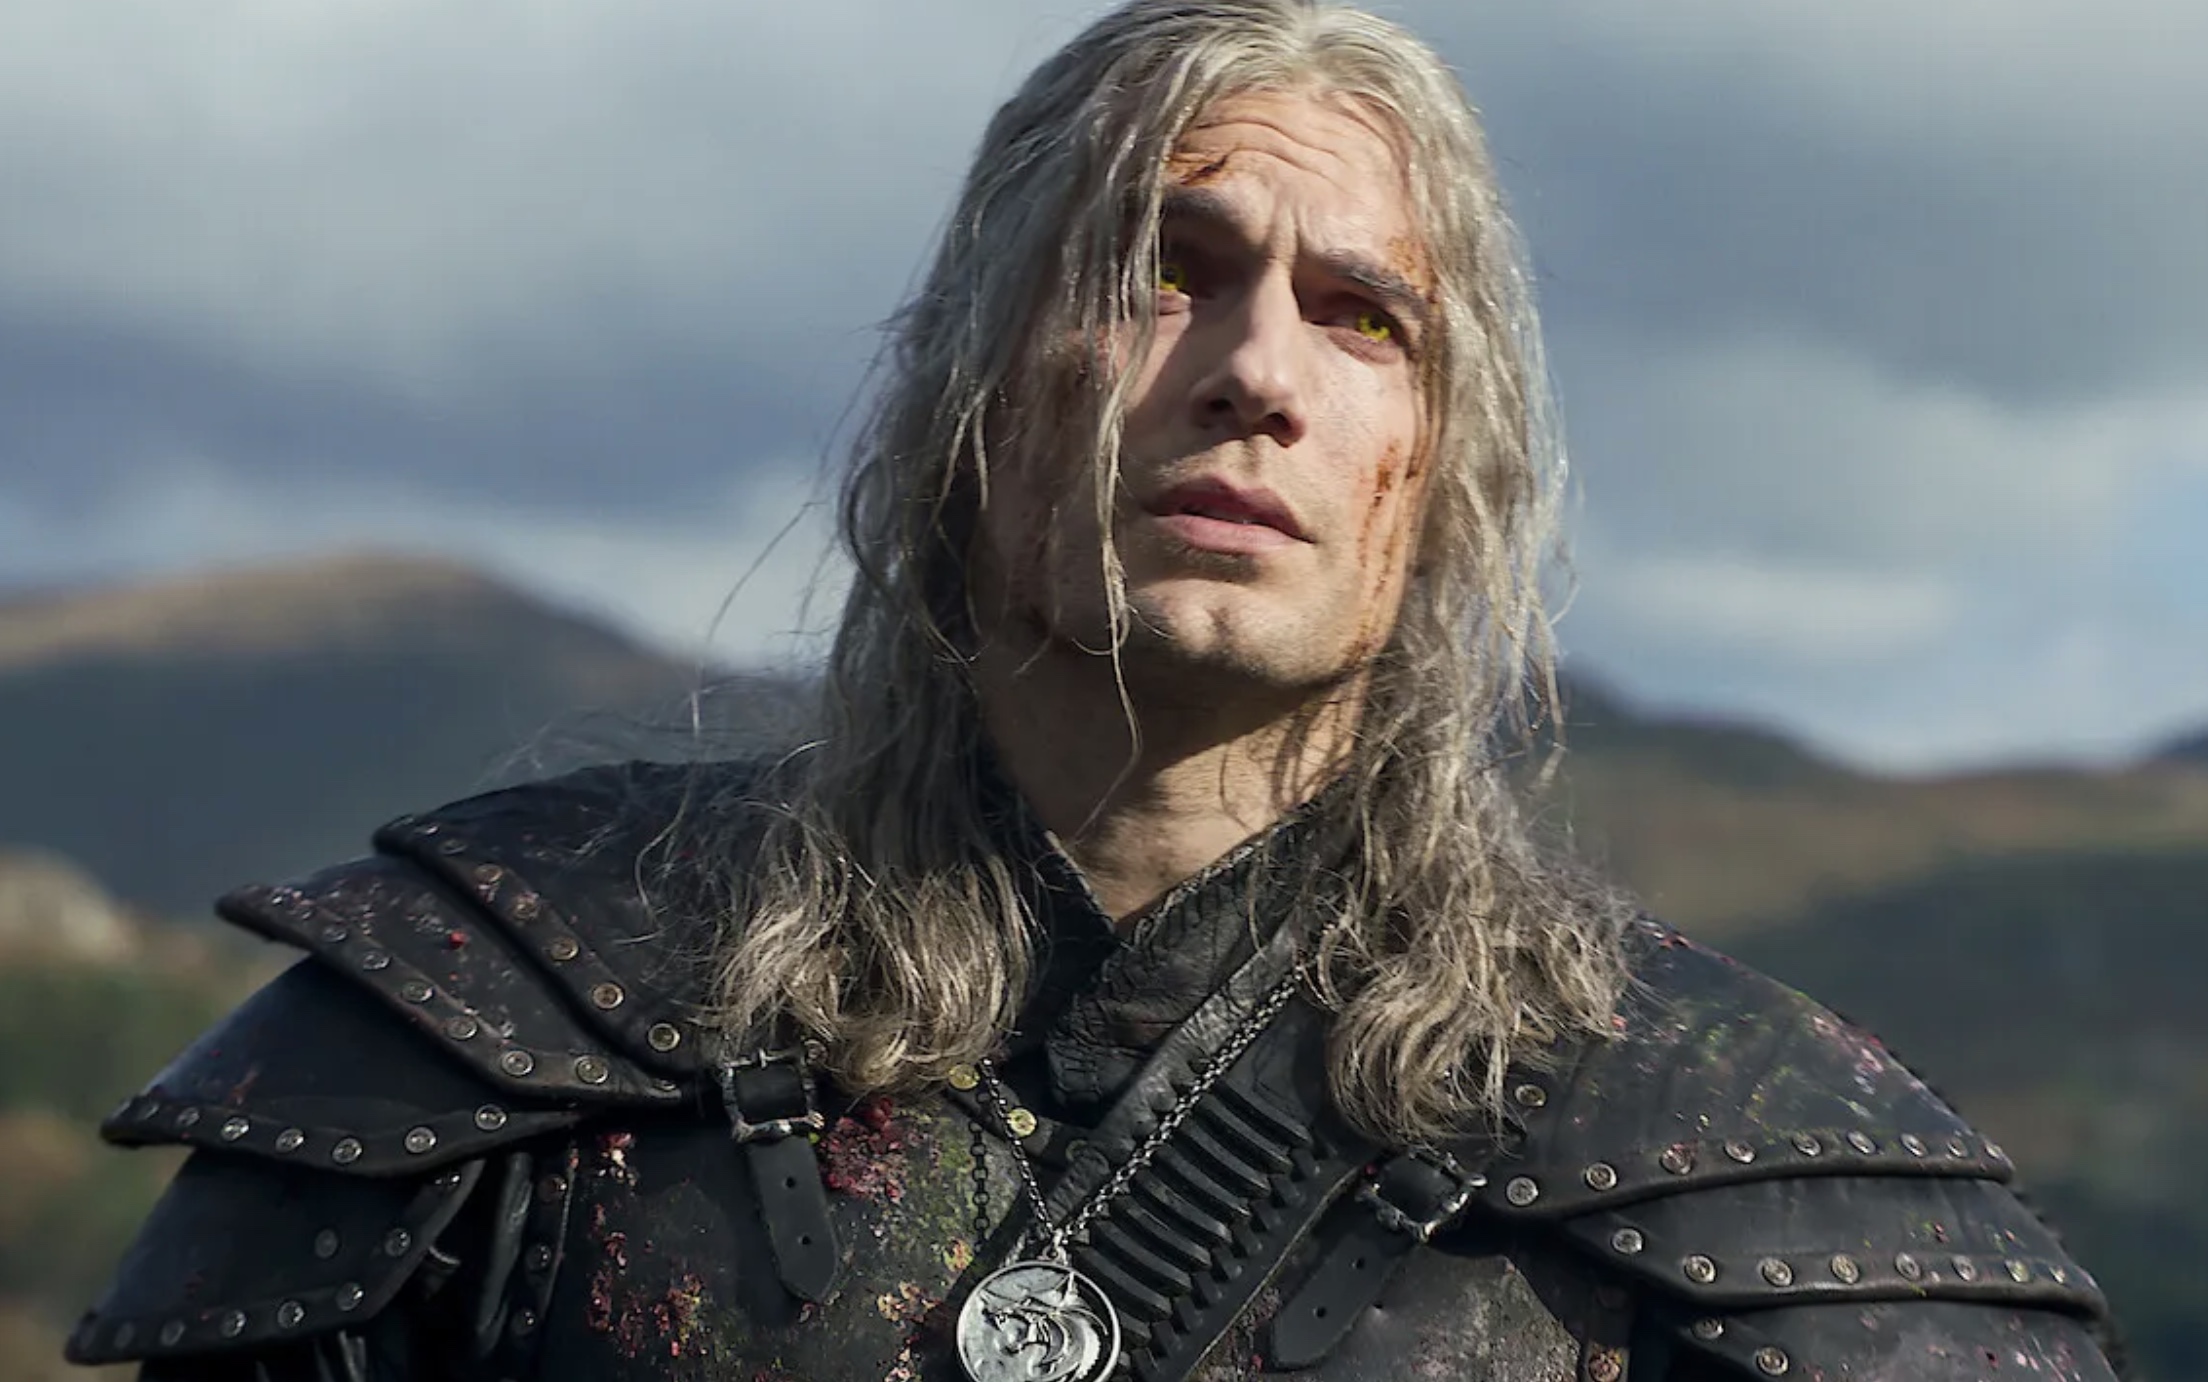 The Hollywood Reporter on X: Henry Cavill is exiting #TheWitcher and Liam  Hemsworth will take over the role of Geralt of Rivia for season four of the  Netflix epic:   /